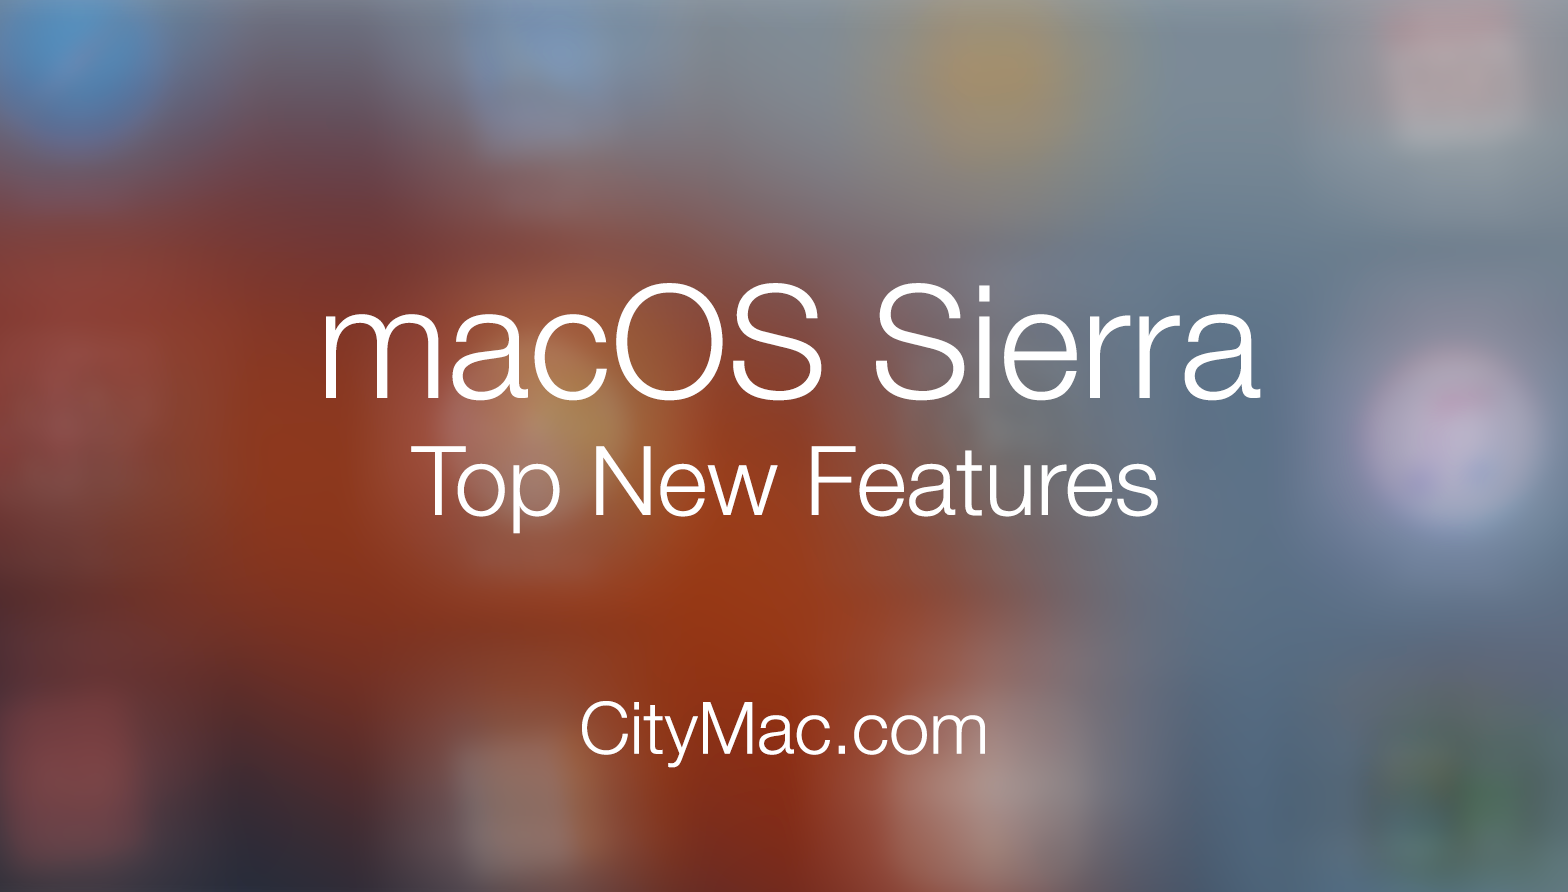 macOS Sierra Top New Features Banner Image